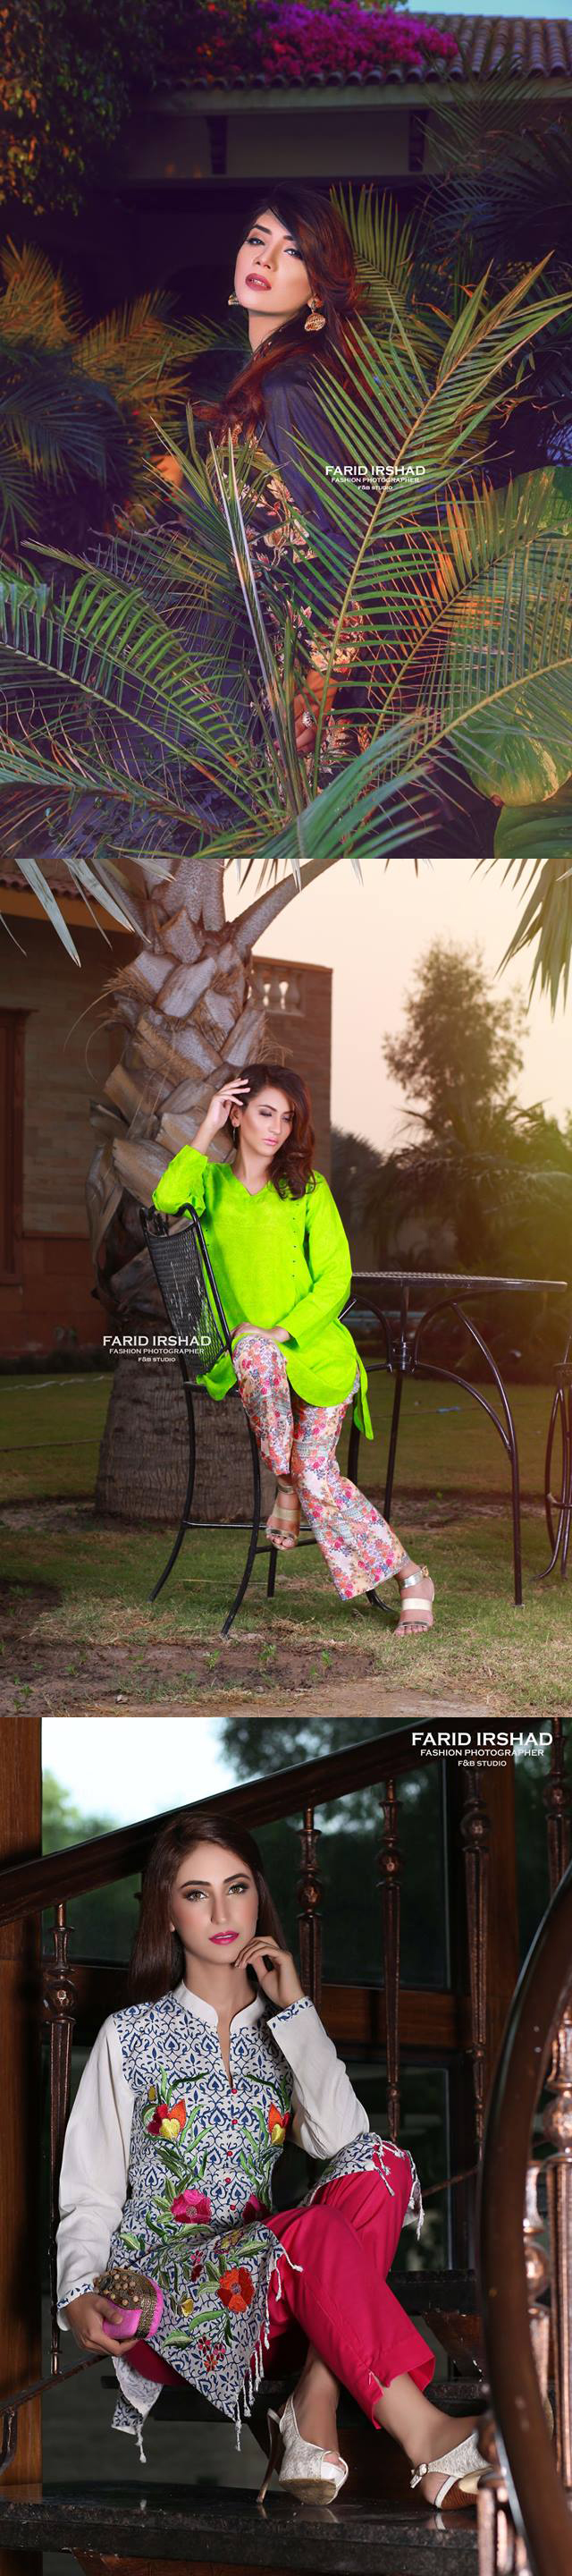 Male model photo shoot of farid Irshad in Lahore